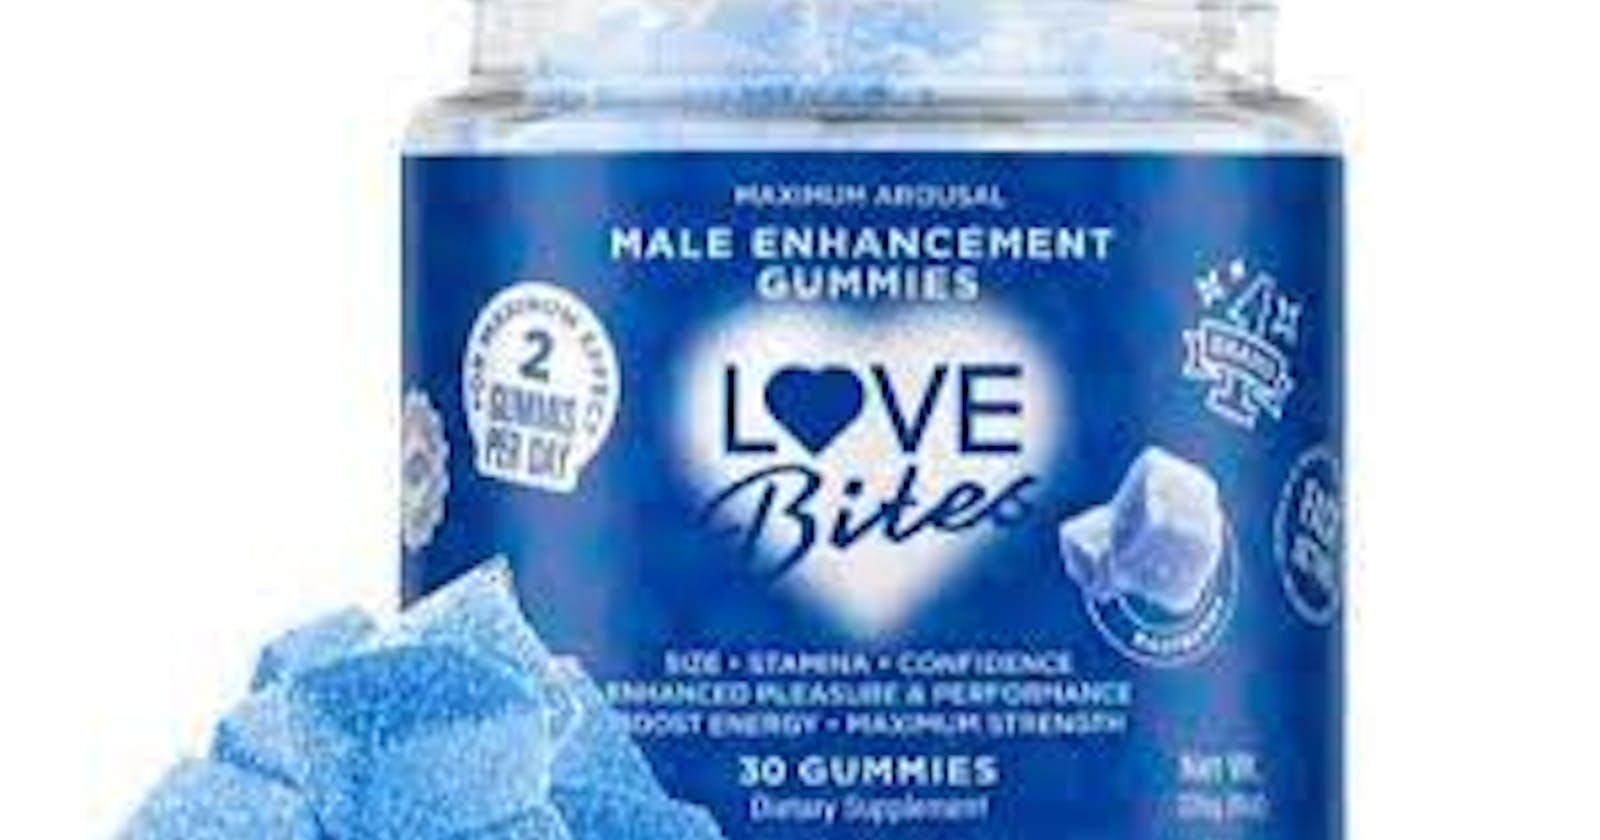 Love Bites Male Enhancement Gummies  REVIEWS DOES IT REALLY WORK? THE TRUTH